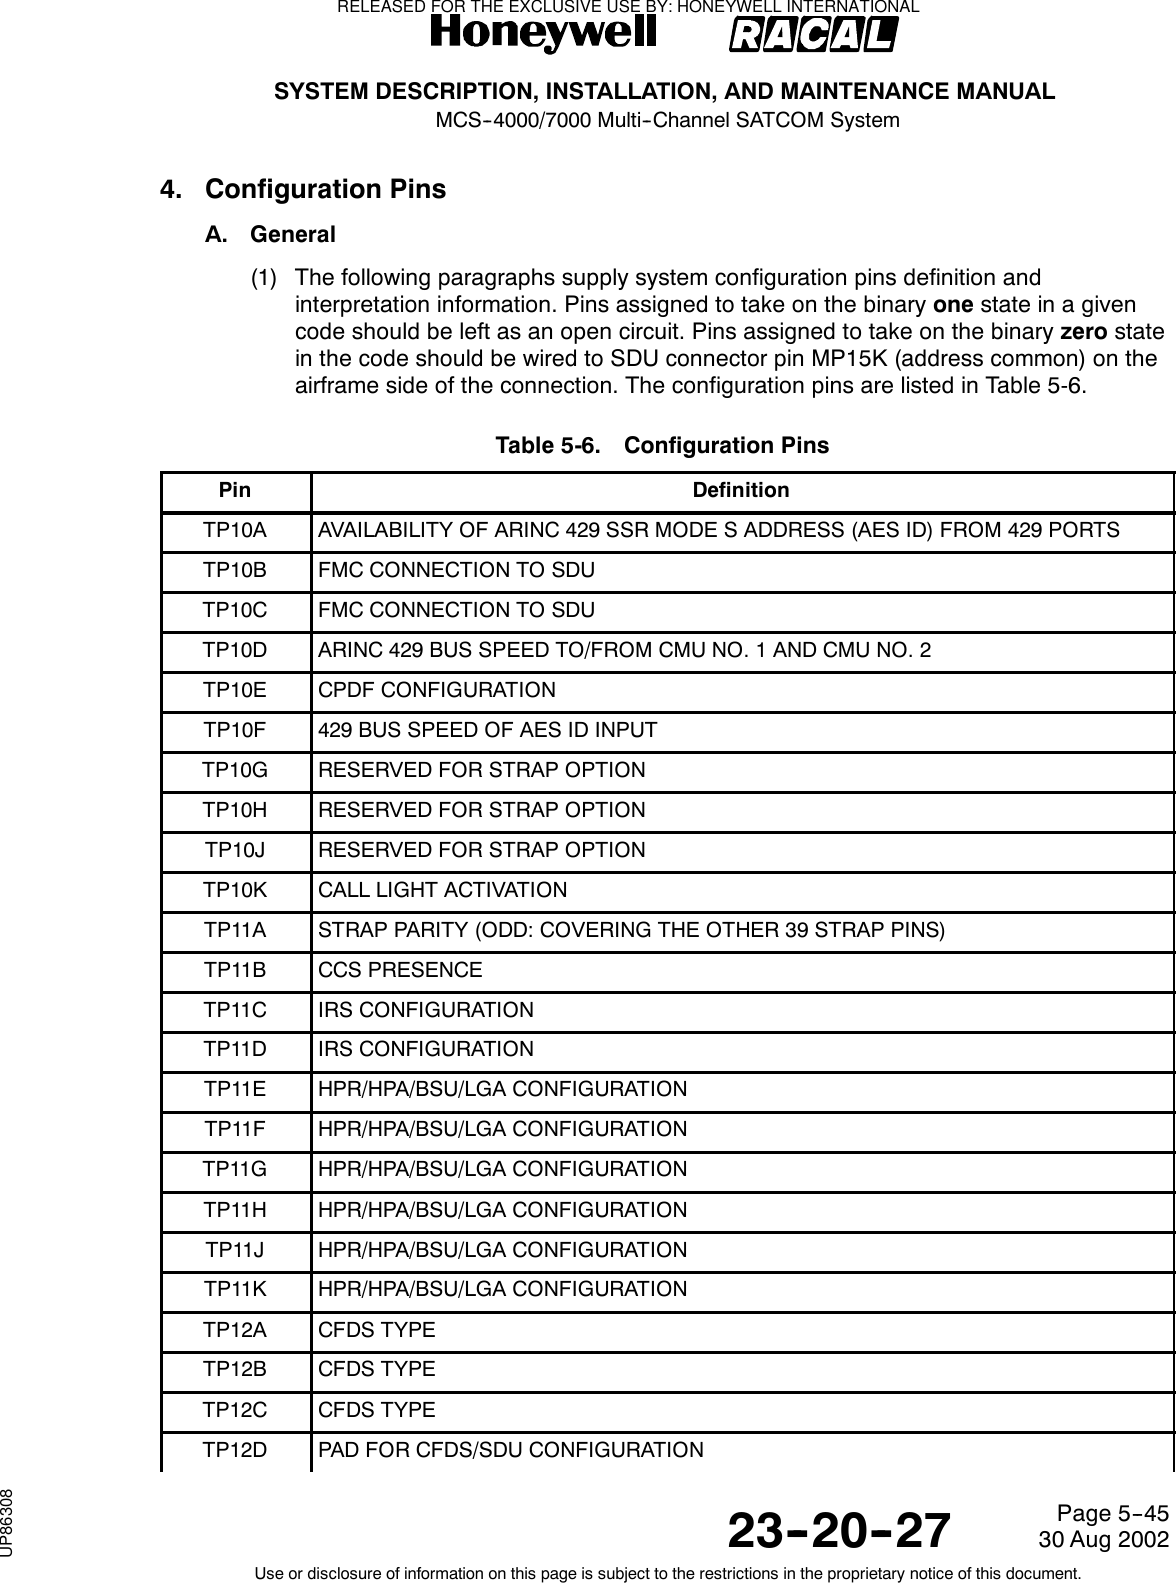 SYSTEM DESCRIPTION, INSTALLATION, AND MAINTENANCE MANUALMCS--4000/7000 Multi--Channel SATCOM System23--20--2730 Aug 2002Use or disclosure of information on this page is subject to the restrictions in the proprietary notice of this document.Page 5--454. Configuration PinsA. General(1) The following paragraphs supply system configuration pins definition andinterpretation information. Pins assigned to take on the binary one stateinagivencode should be left as an open circuit. Pins assigned to take on the binary zero statein the code should be wired to SDU connector pin MP15K (address common) on theairframe side of the connection. The configuration pins are listed in Table 5-6.Table 5-6. Configuration PinsPin DefinitionTP10A AVAILABILITY OF ARINC 429 SSR MODE S ADDRESS (AES ID) FROM 429 PORTSTP10B FMC CONNECTION TO SDUTP10C FMC CONNECTION TO SDUTP10D ARINC 429 BUS SPEED TO/FROM CMU NO. 1 AND CMU NO. 2TP10E CPDF CONFIGURATIONTP10F 429 BUS SPEED OF AES ID INPUTTP10G RESERVED FOR STRAP OPTIONTP10H RESERVED FOR STRAP OPTIONTP10J RESERVED FOR STRAP OPTIONTP10K CALL LIGHT ACTIVATIONTP11A STRAP PARITY (ODD: COVERING THE OTHER 39 STRAP PINS)TP11B CCS PRESENCETP11C IRS CONFIGURATIONTP11D IRS CONFIGURATIONTP11E HPR/HPA/BSU/LGA CONFIGURATIONTP11F HPR/HPA/BSU/LGA CONFIGURATIONTP11G HPR/HPA/BSU/LGA CONFIGURATIONTP11H HPR/HPA/BSU/LGA CONFIGURATIONTP11J HPR/HPA/BSU/LGA CONFIGURATIONTP11K HPR/HPA/BSU/LGA CONFIGURATIONTP12A CFDS TYPETP12B CFDS TYPETP12C CFDS TYPETP12D PAD FOR CFDS/SDU CONFIGURATIONRELEASED FOR THE EXCLUSIVE USE BY: HONEYWELL INTERNATIONALUP86308